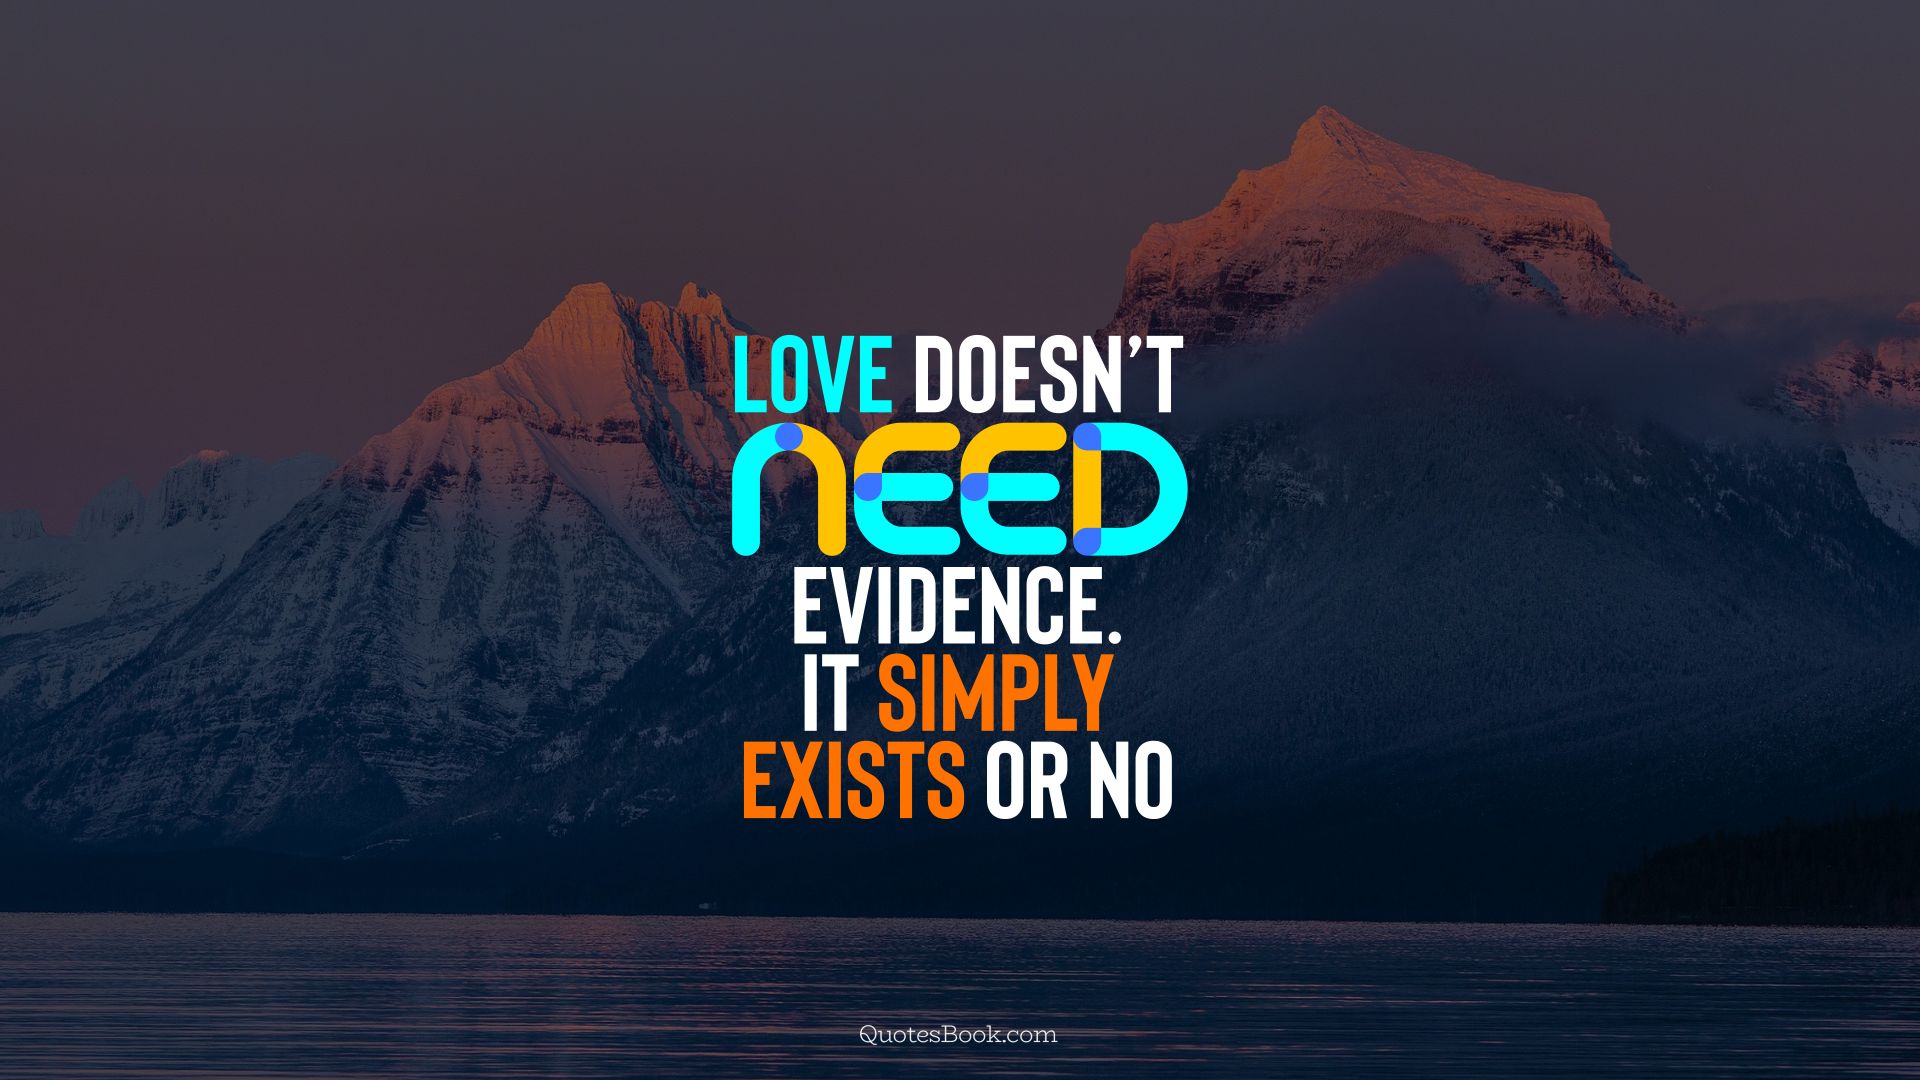 Love doesn’t need evidence. It simply exists or no. - Quote by QuotesBook